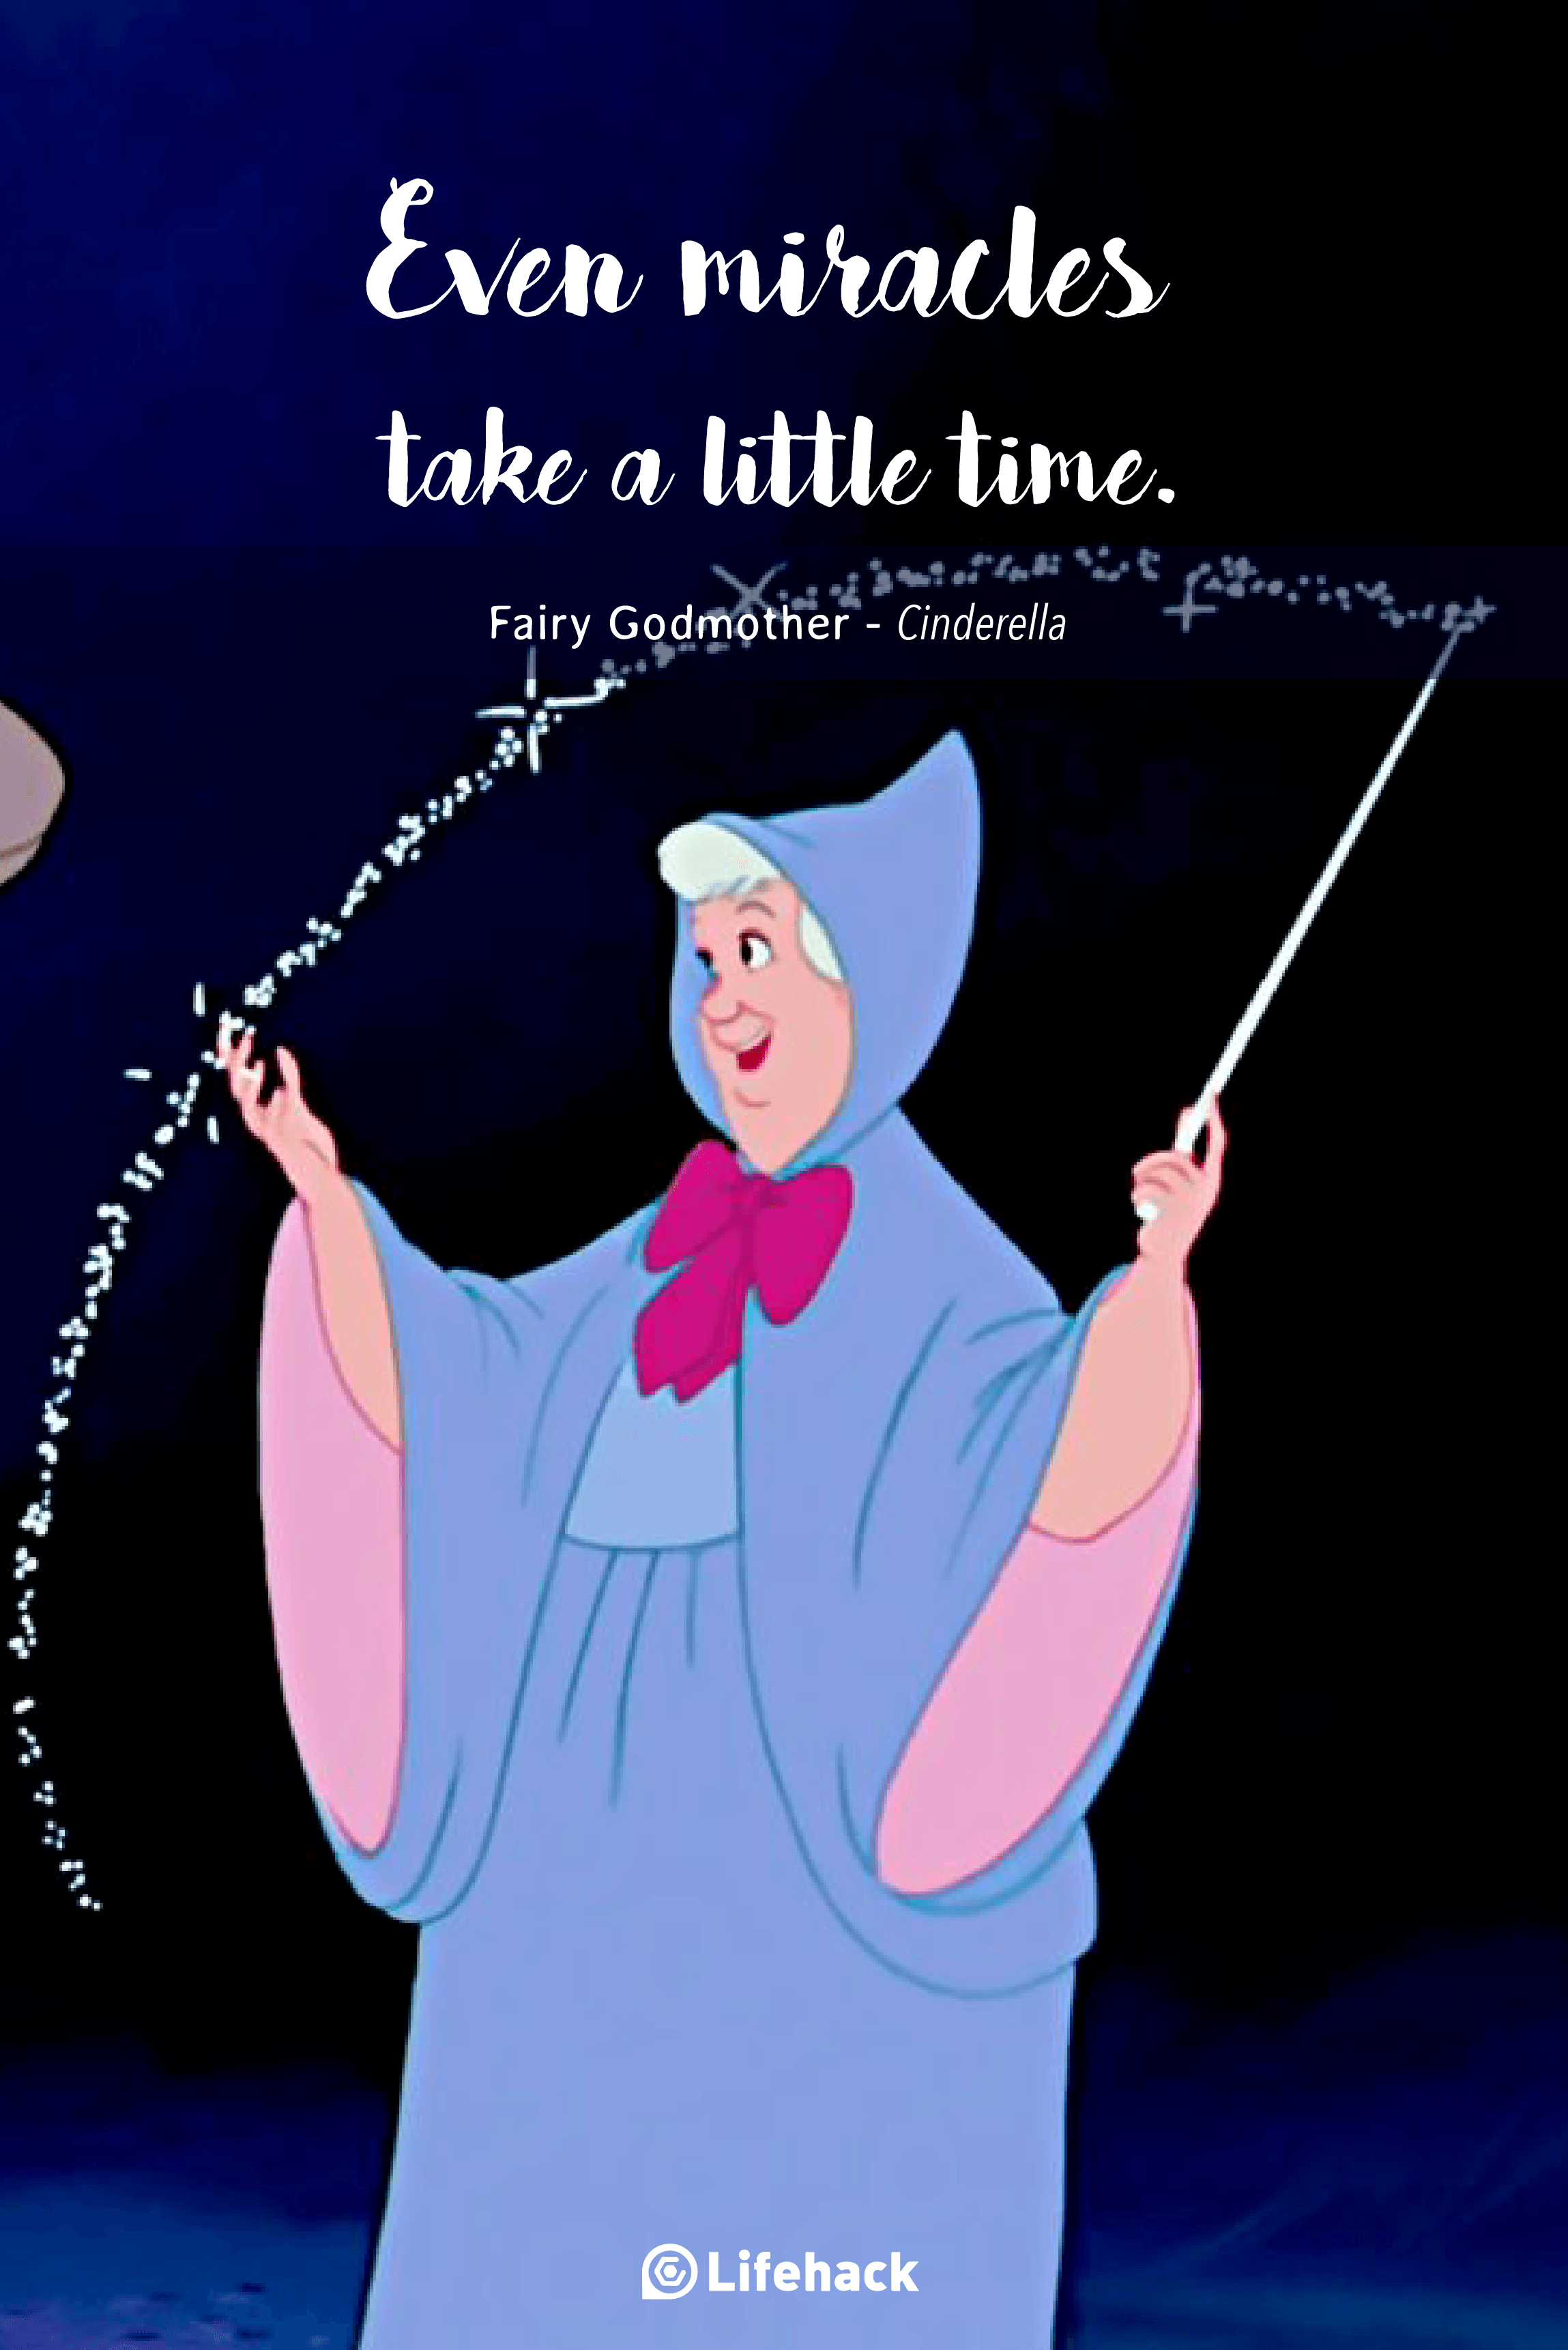 20 Charming Disney Quotes to Warm Your Heart